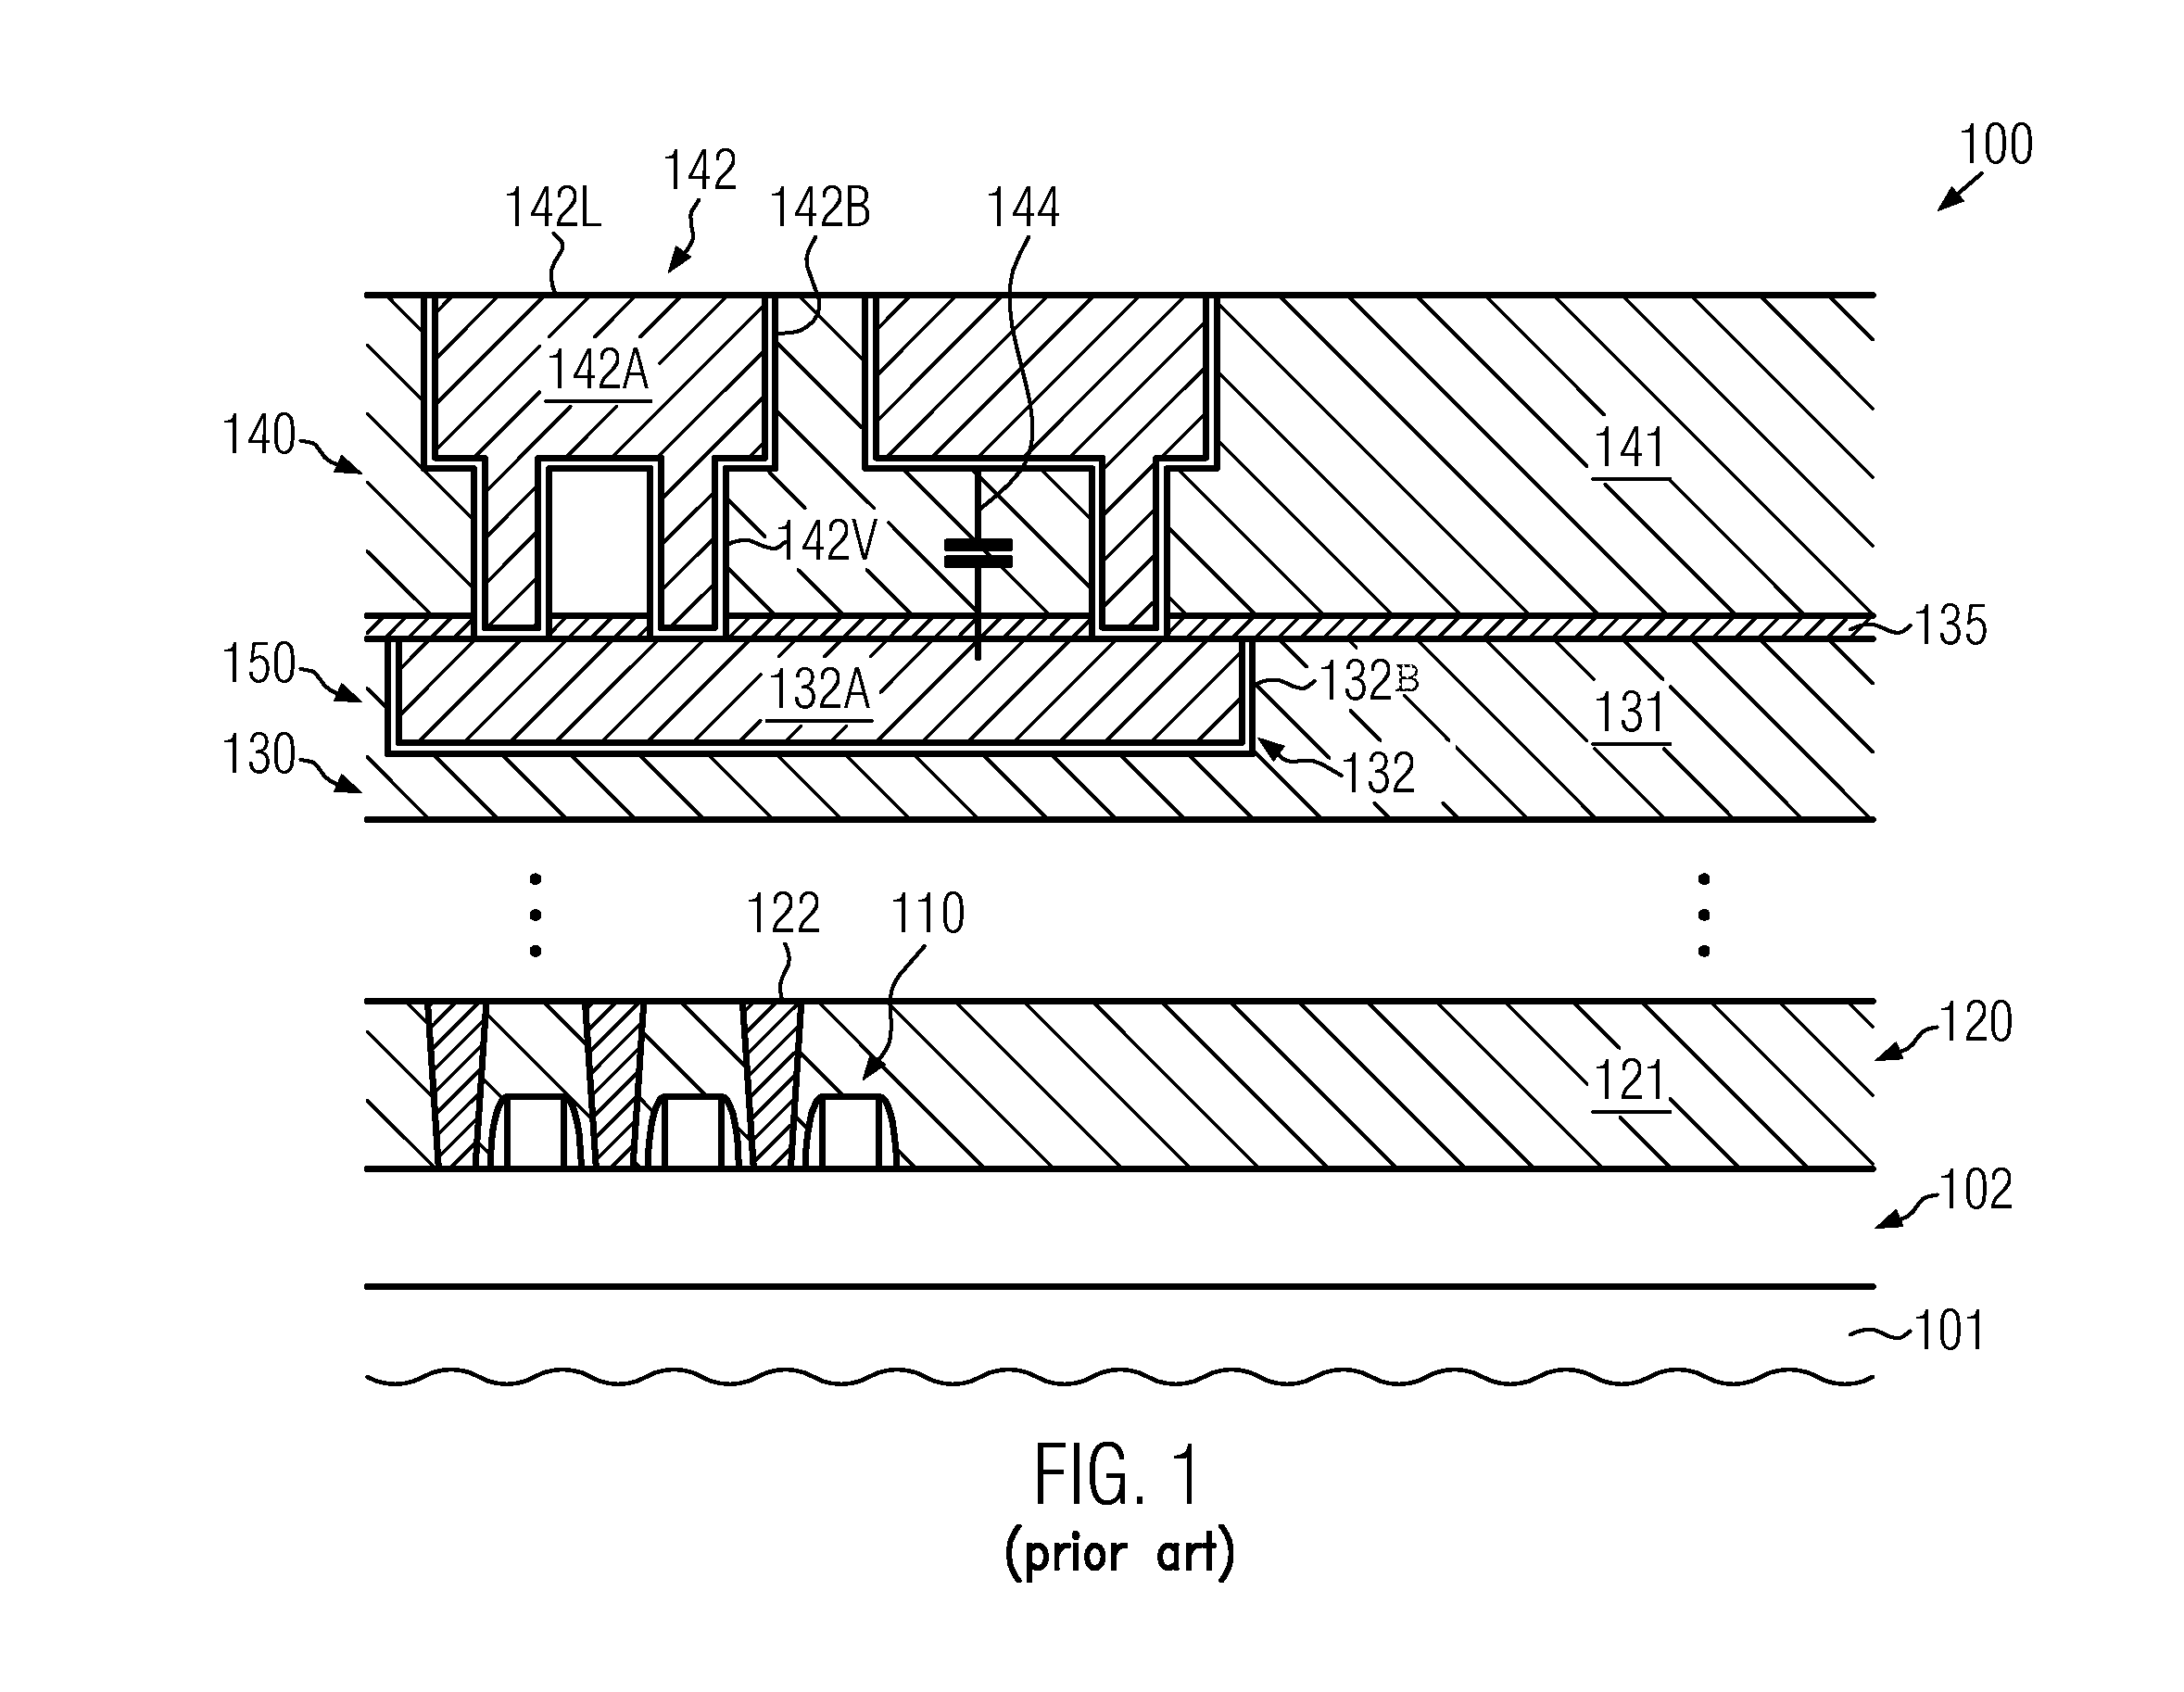 Semiconductor device comprising metallization layers of reduced interlayer capacitance by reducing the amount of etch stop materials